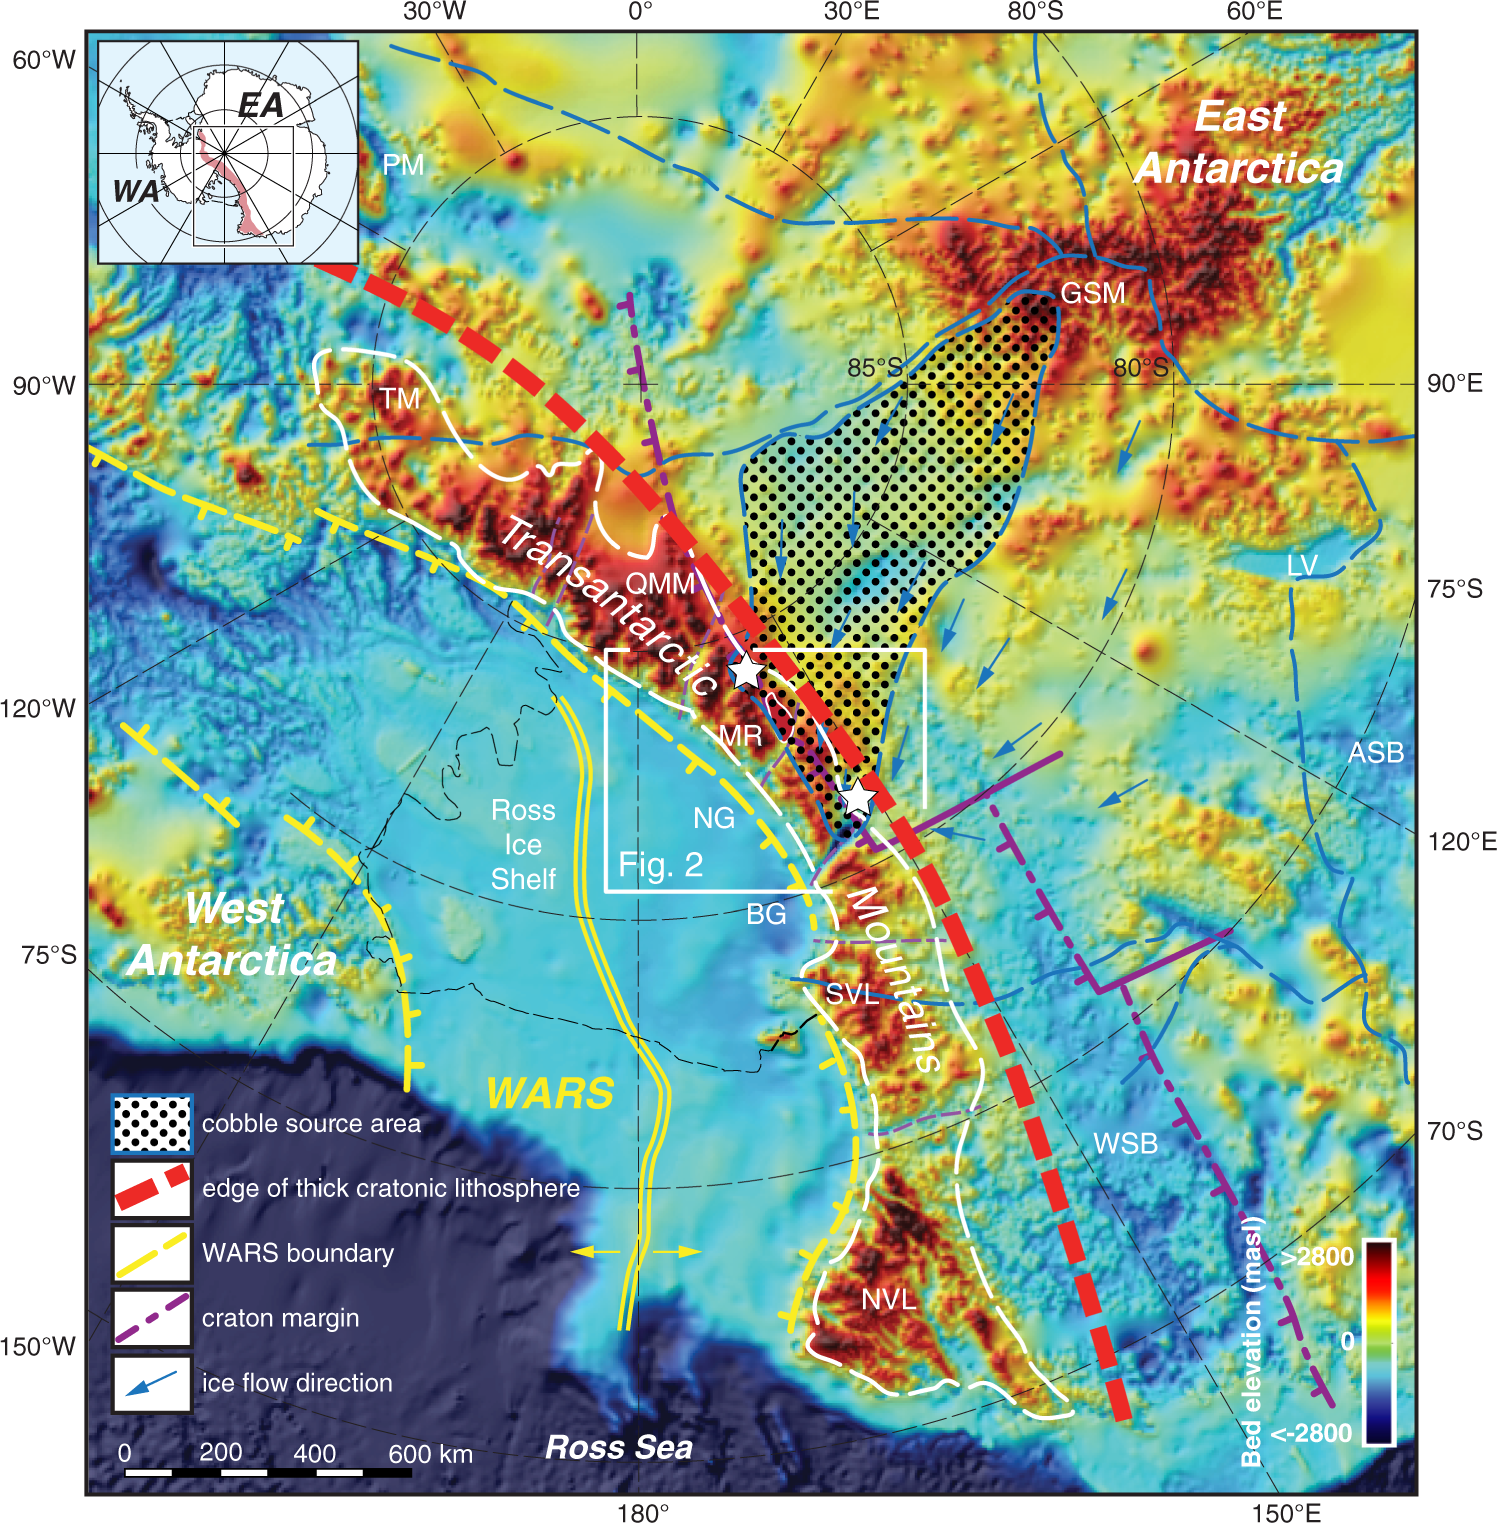 Exhumation and tectonic history of inaccessible subglacial interior East  Antarctica from thermochronology on glacial erratics | Nature Communications